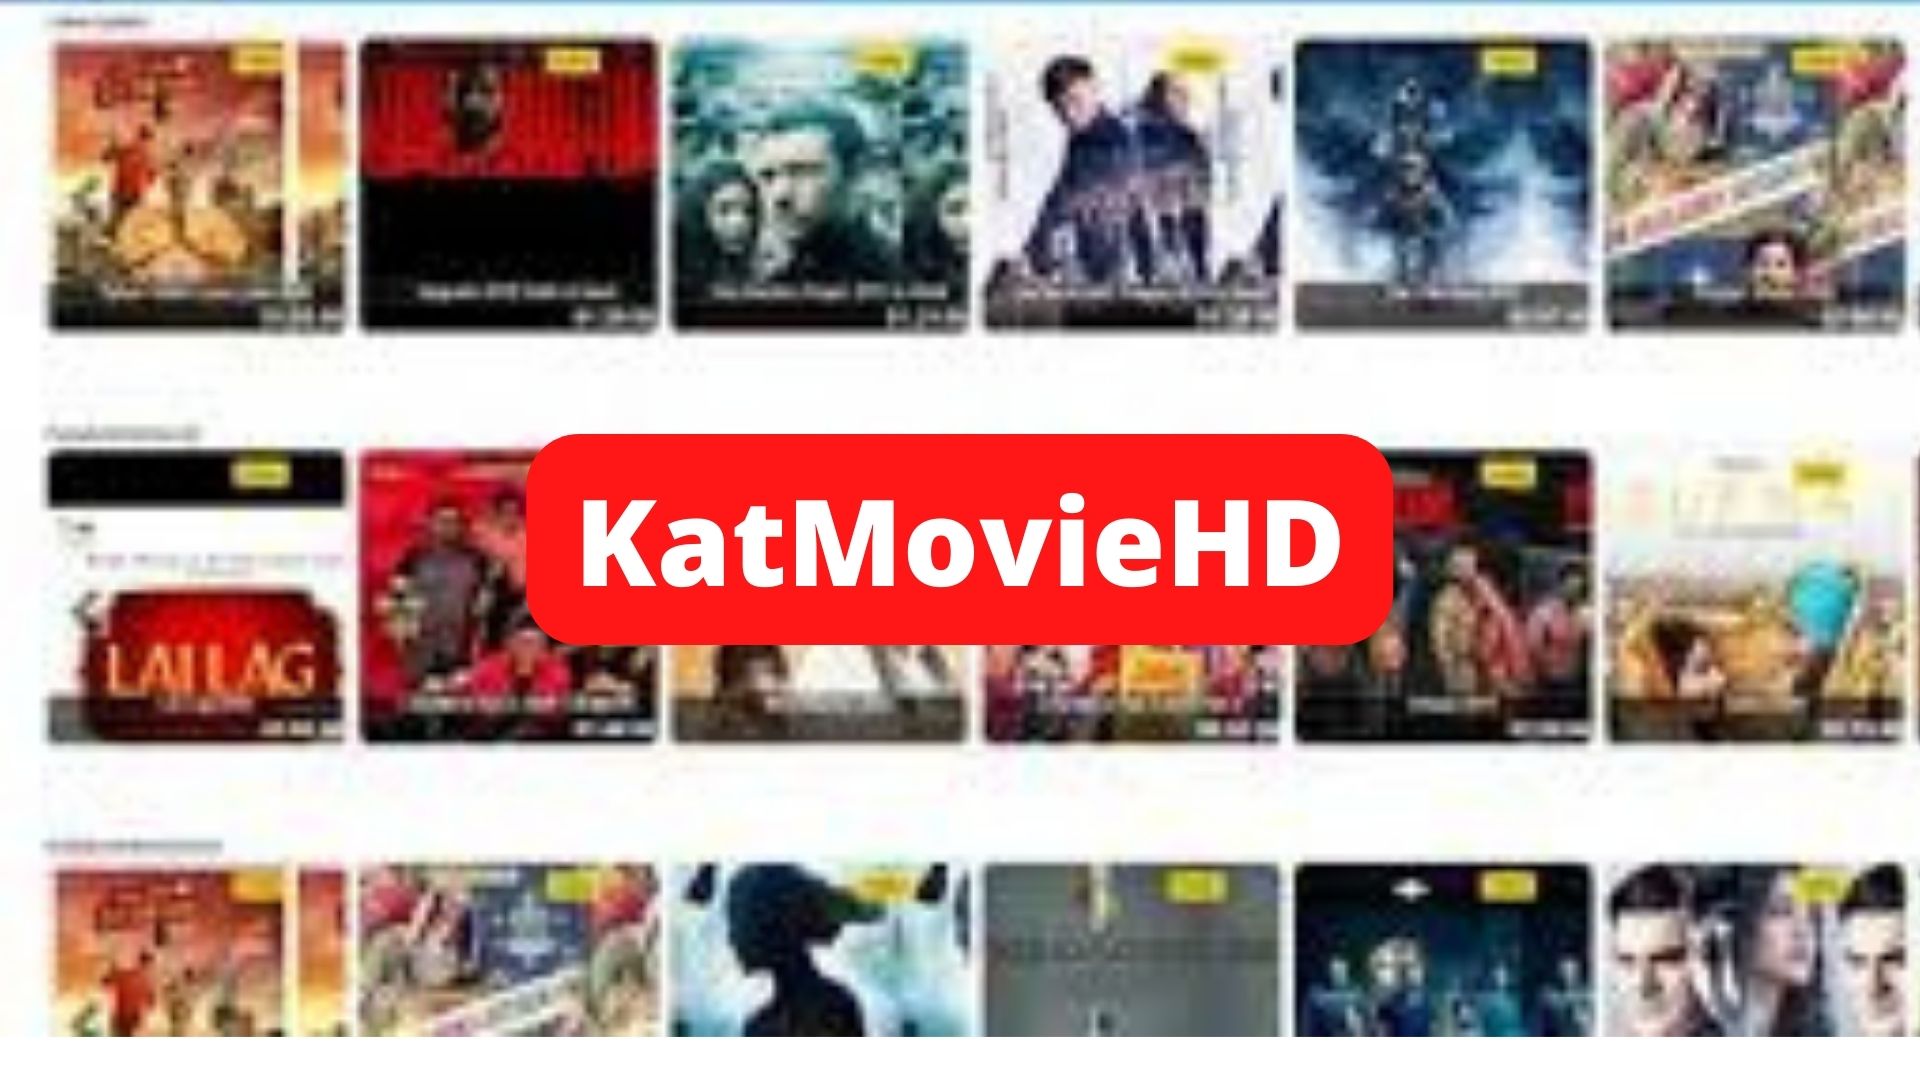 Everything that you need to know about KatmovieHD